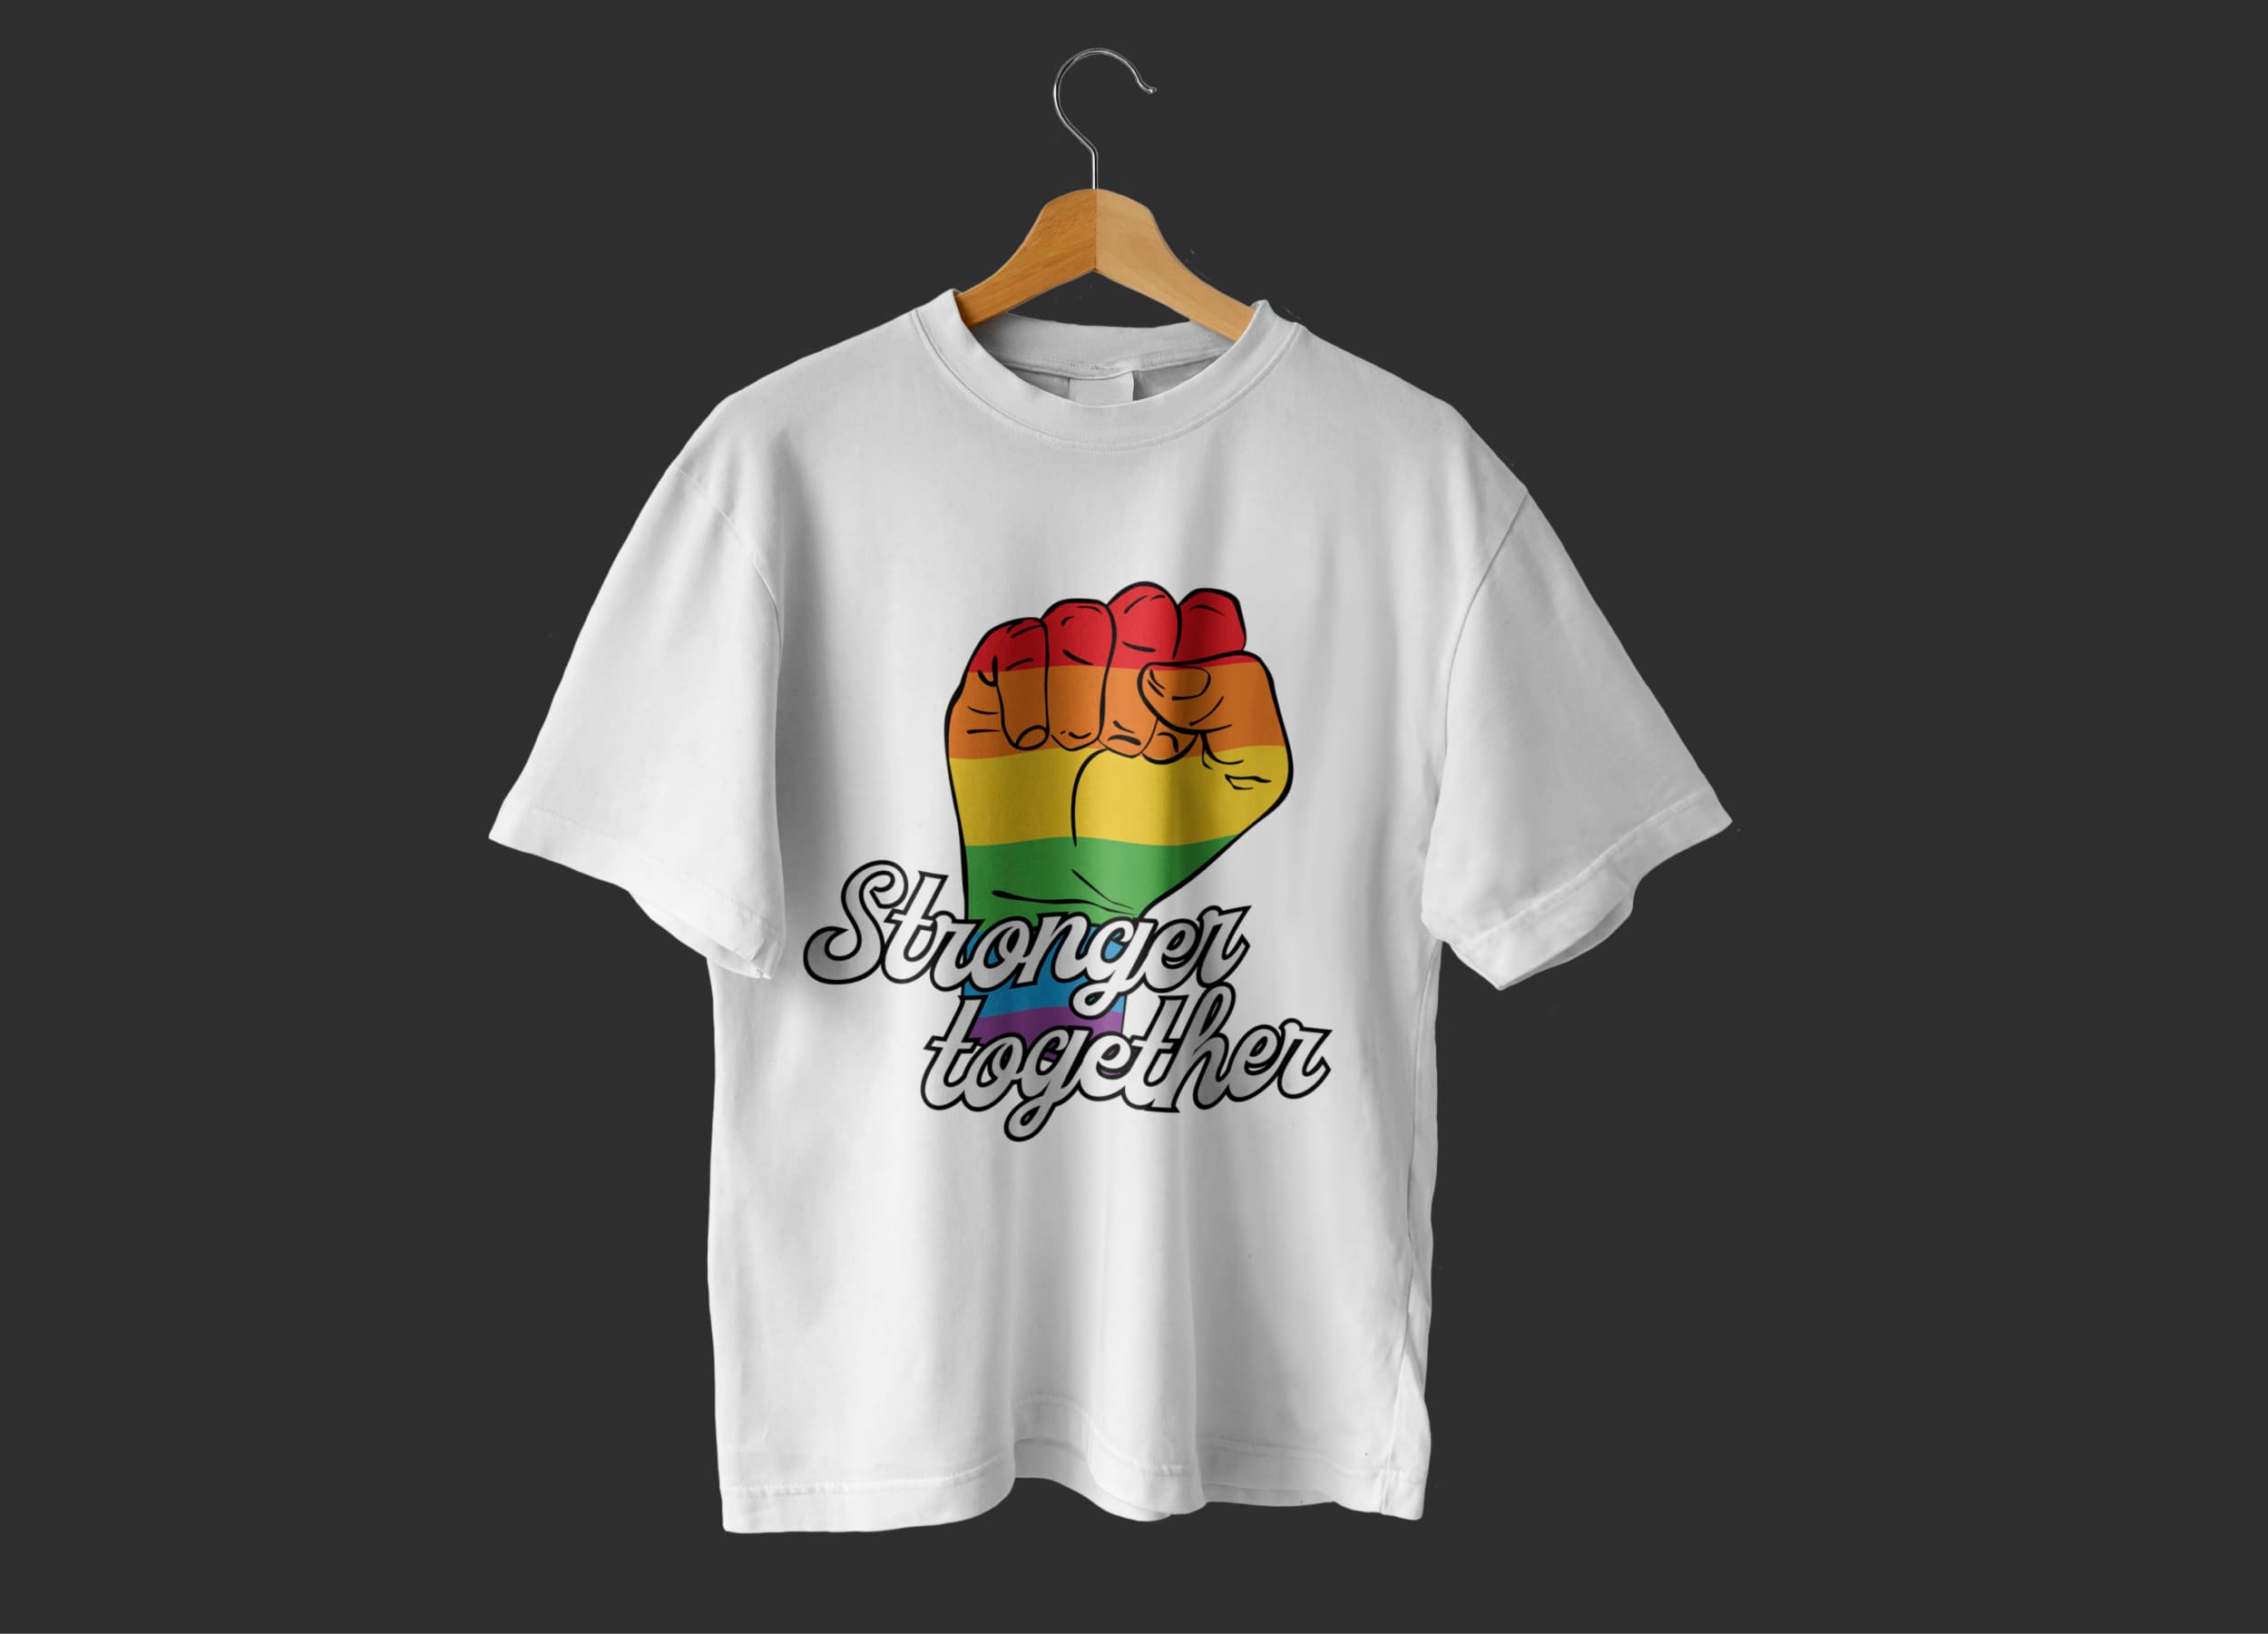 A white t-shirt with an image of a hand in the colors of the LGBT flag and the grey lettering "Stronger together" on a hanger, on a dark gray background.